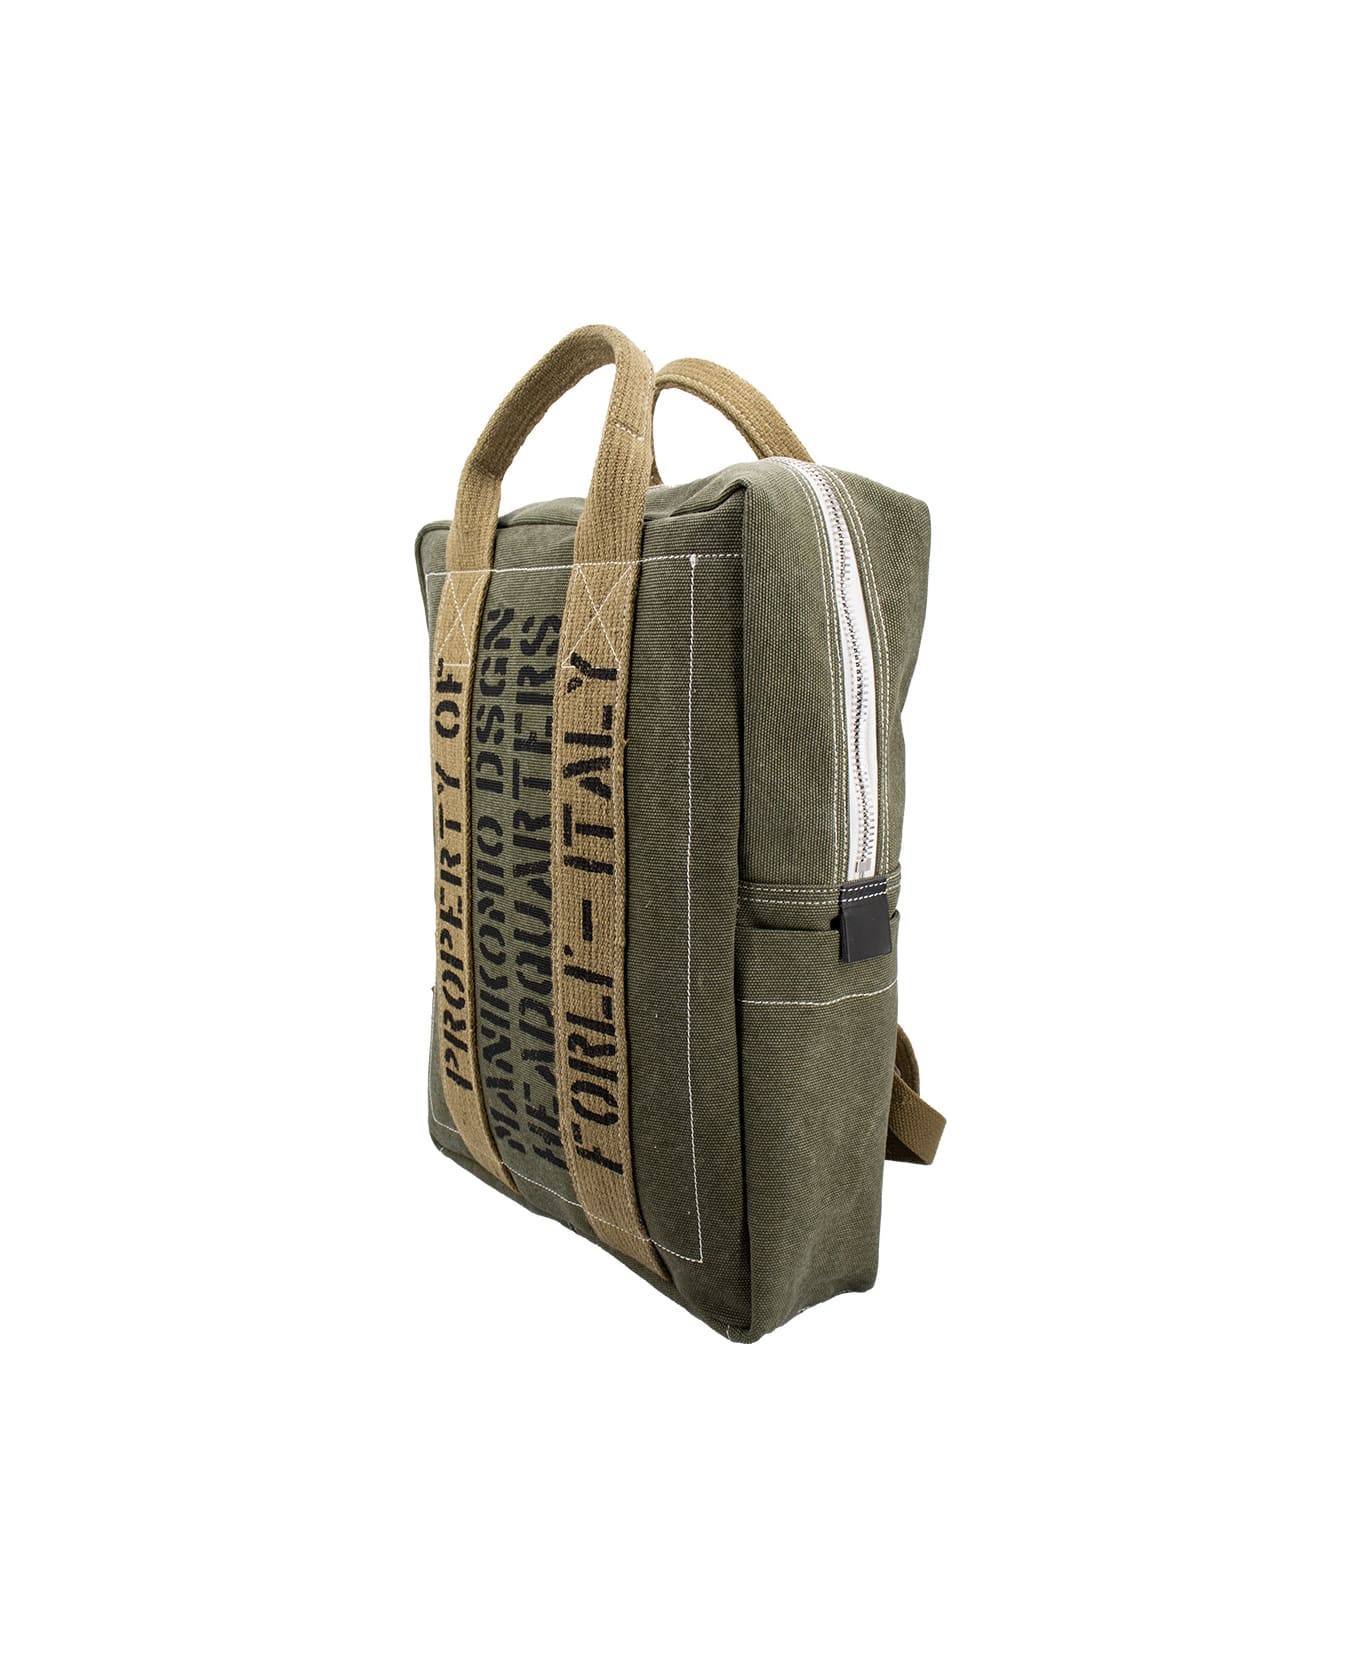 Manikomio Dsgn Backpack - MILITARY STRONG